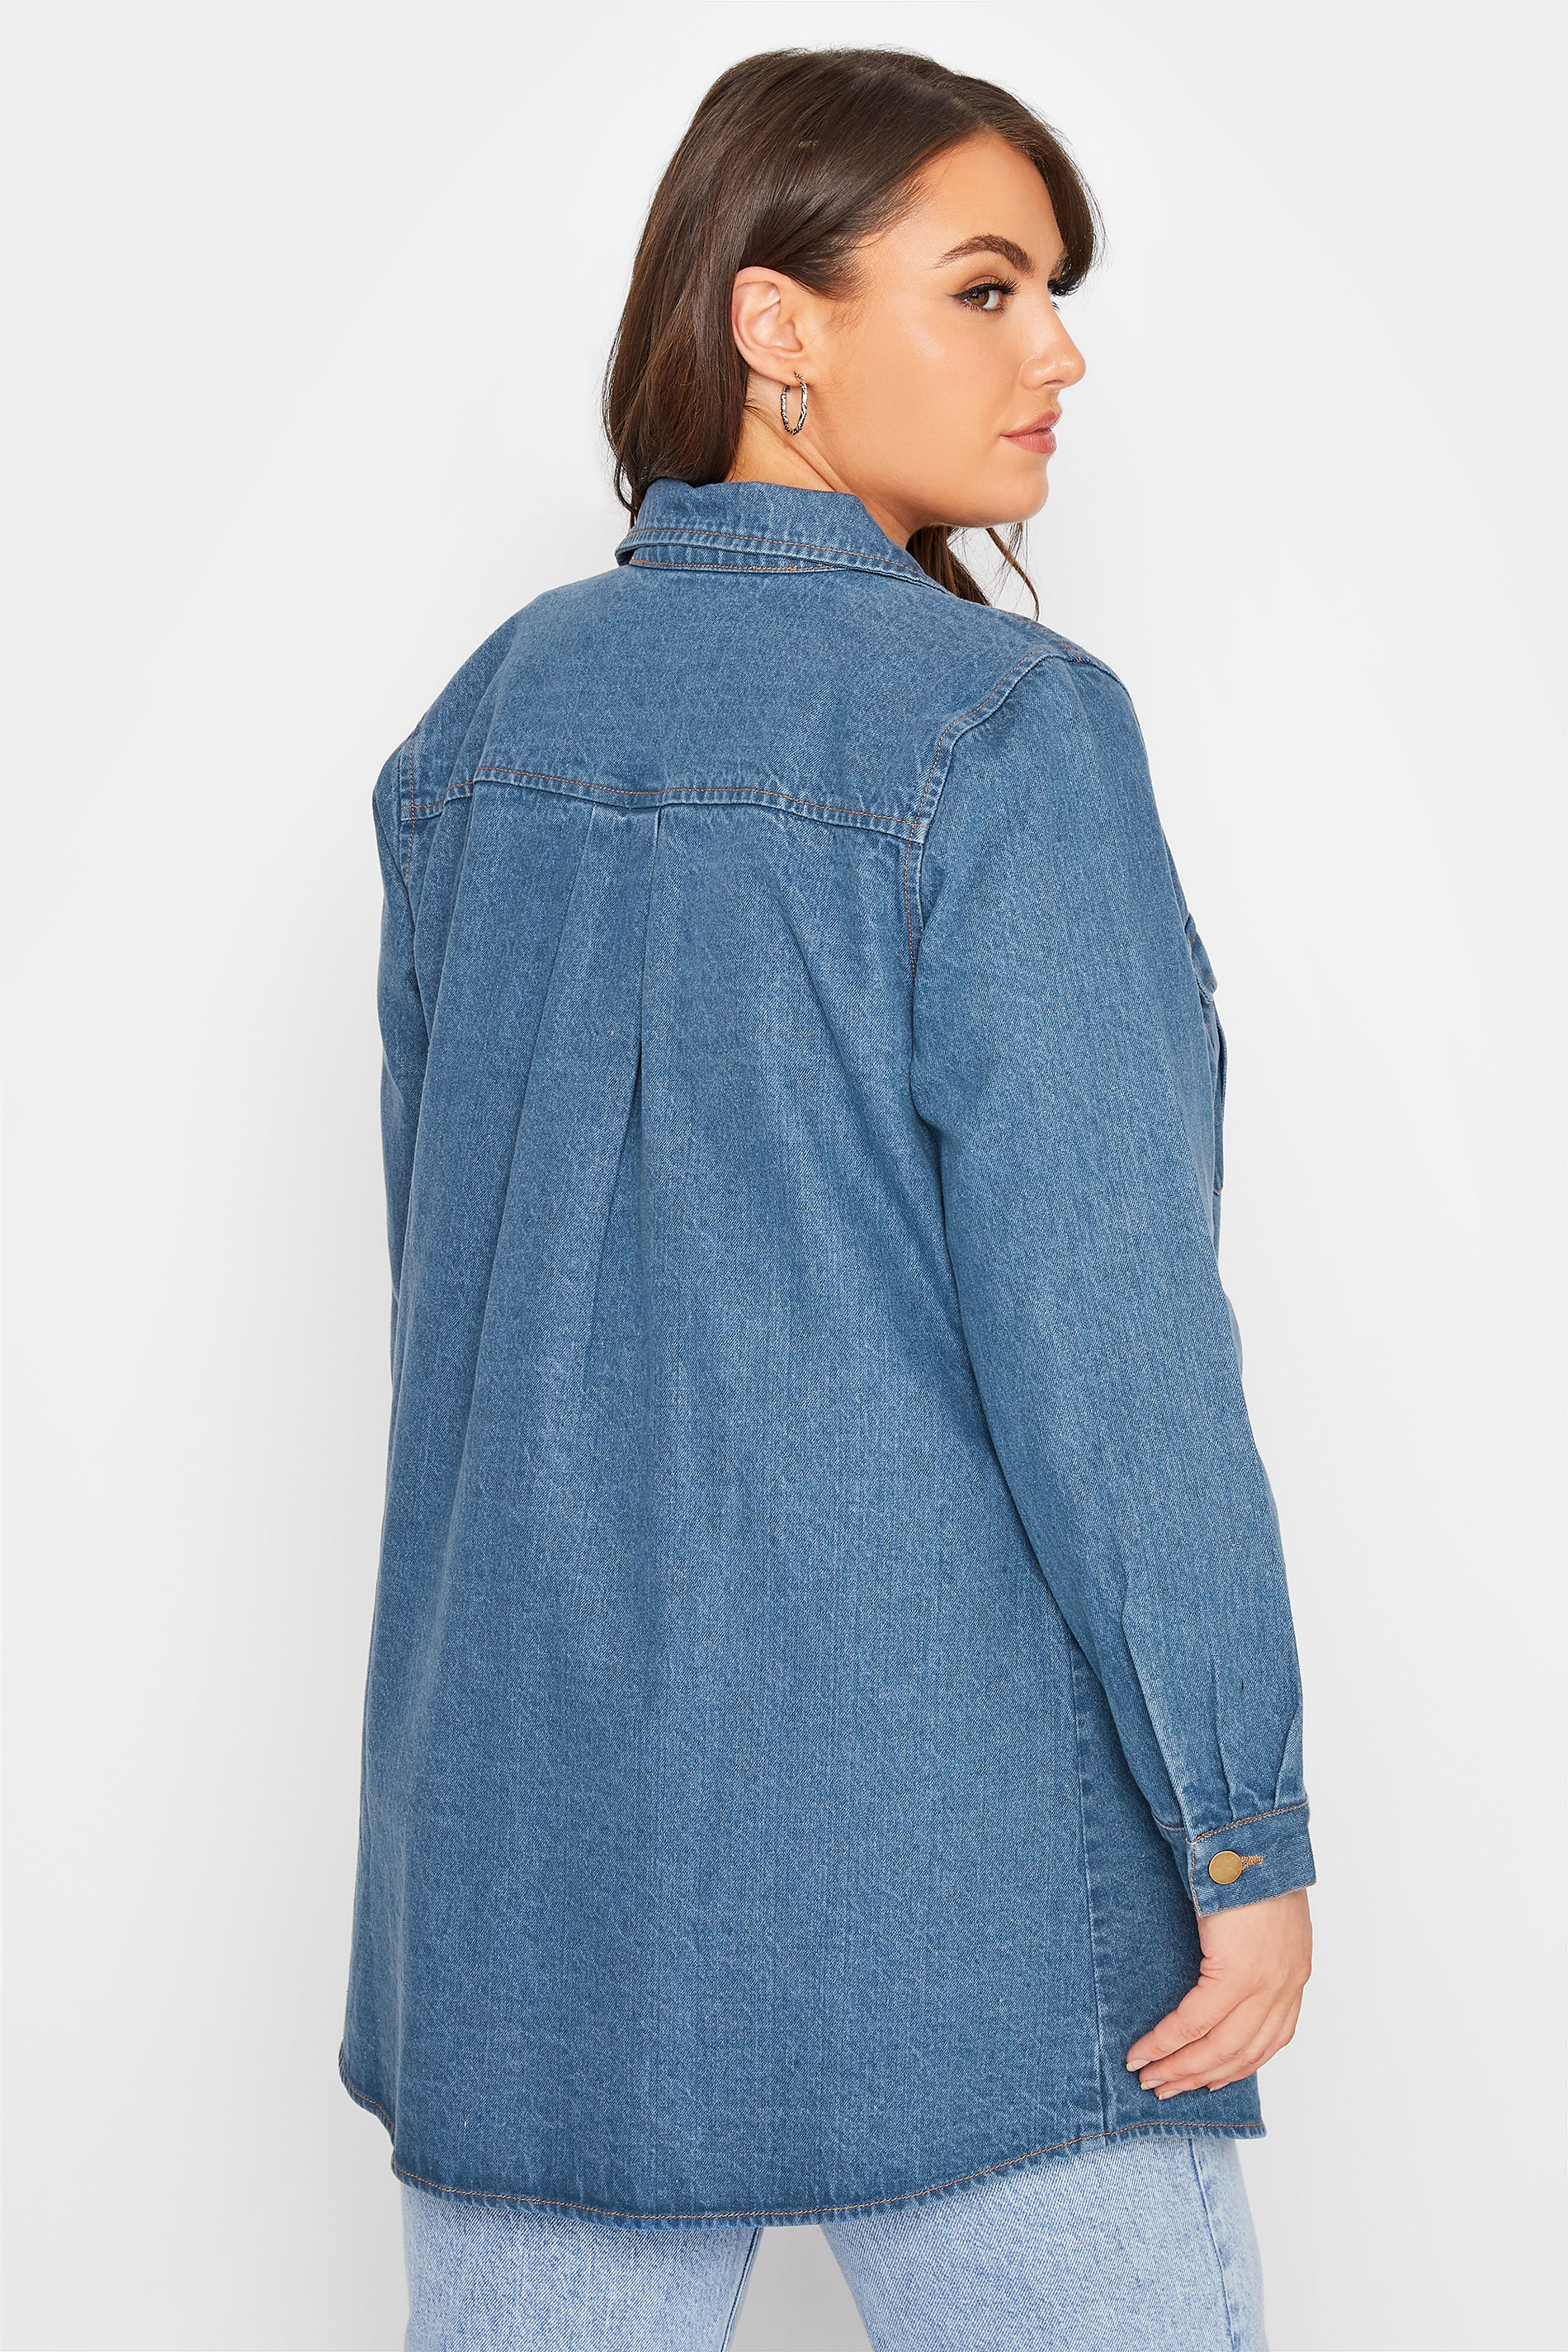 LIMITED COLLECTION Plus Size Blue Denim Shacket | Yours Clothing  3